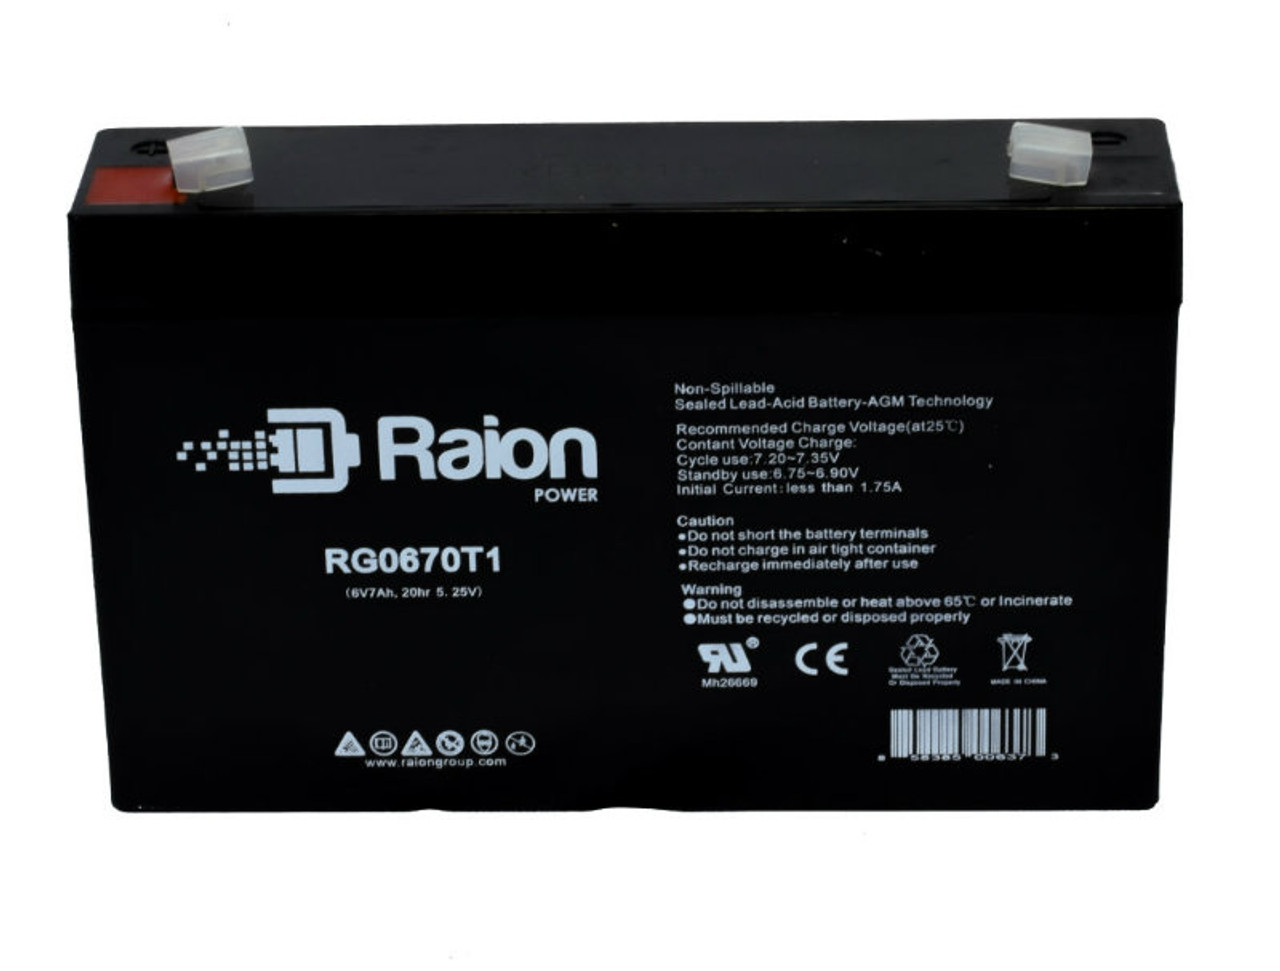 Raion Power RG0670T1 Replacement Battery Cartridge for Sentry Lite PM670